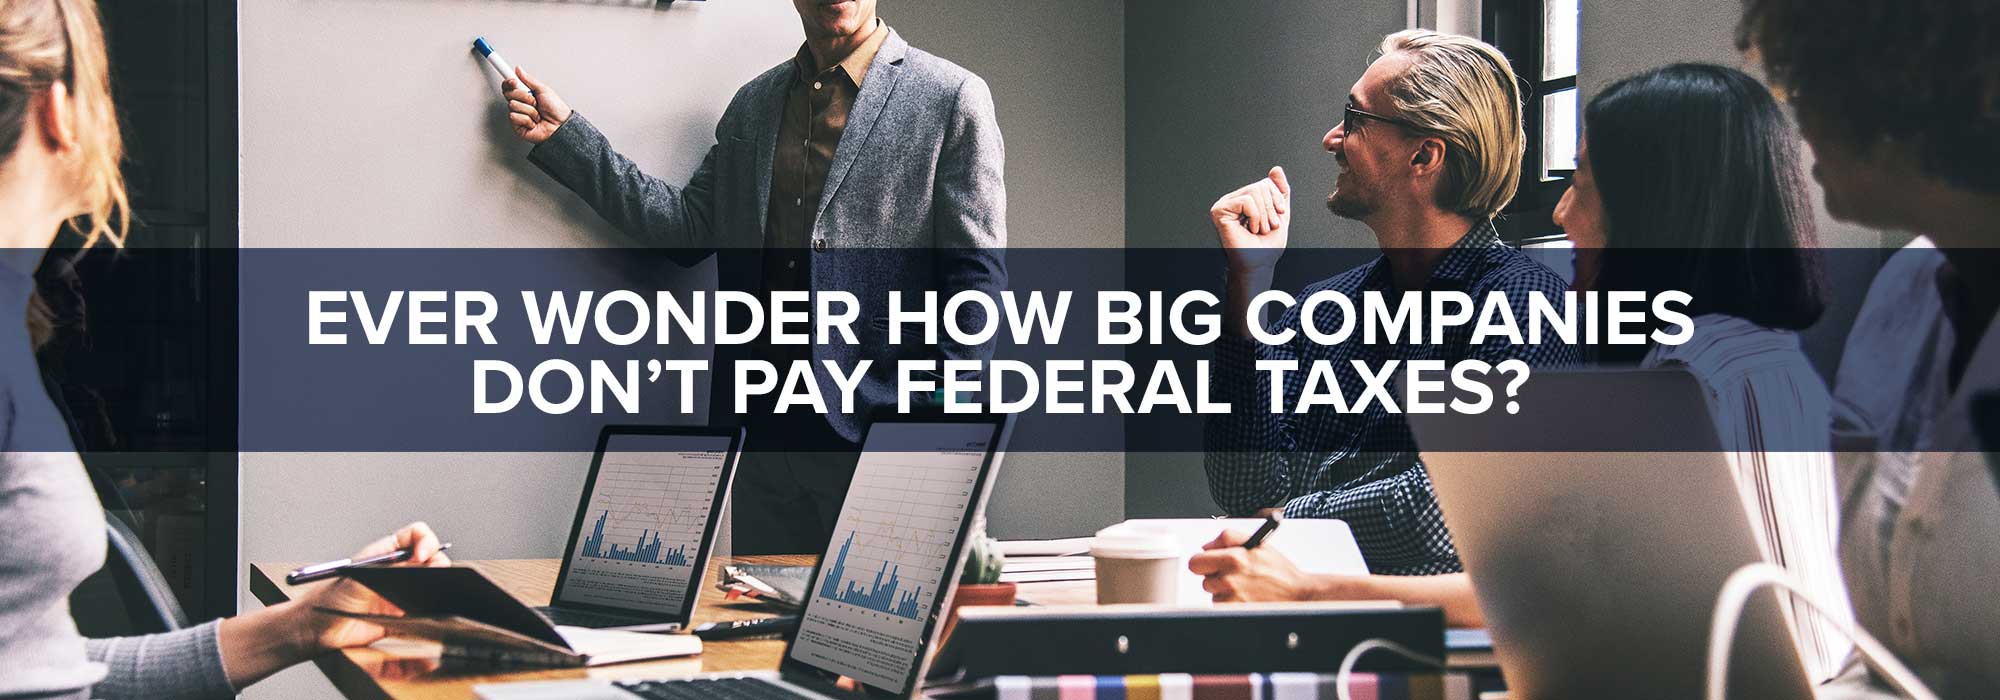 Ever Wonder How BIG Companies Don’t Pay Federal Taxes?